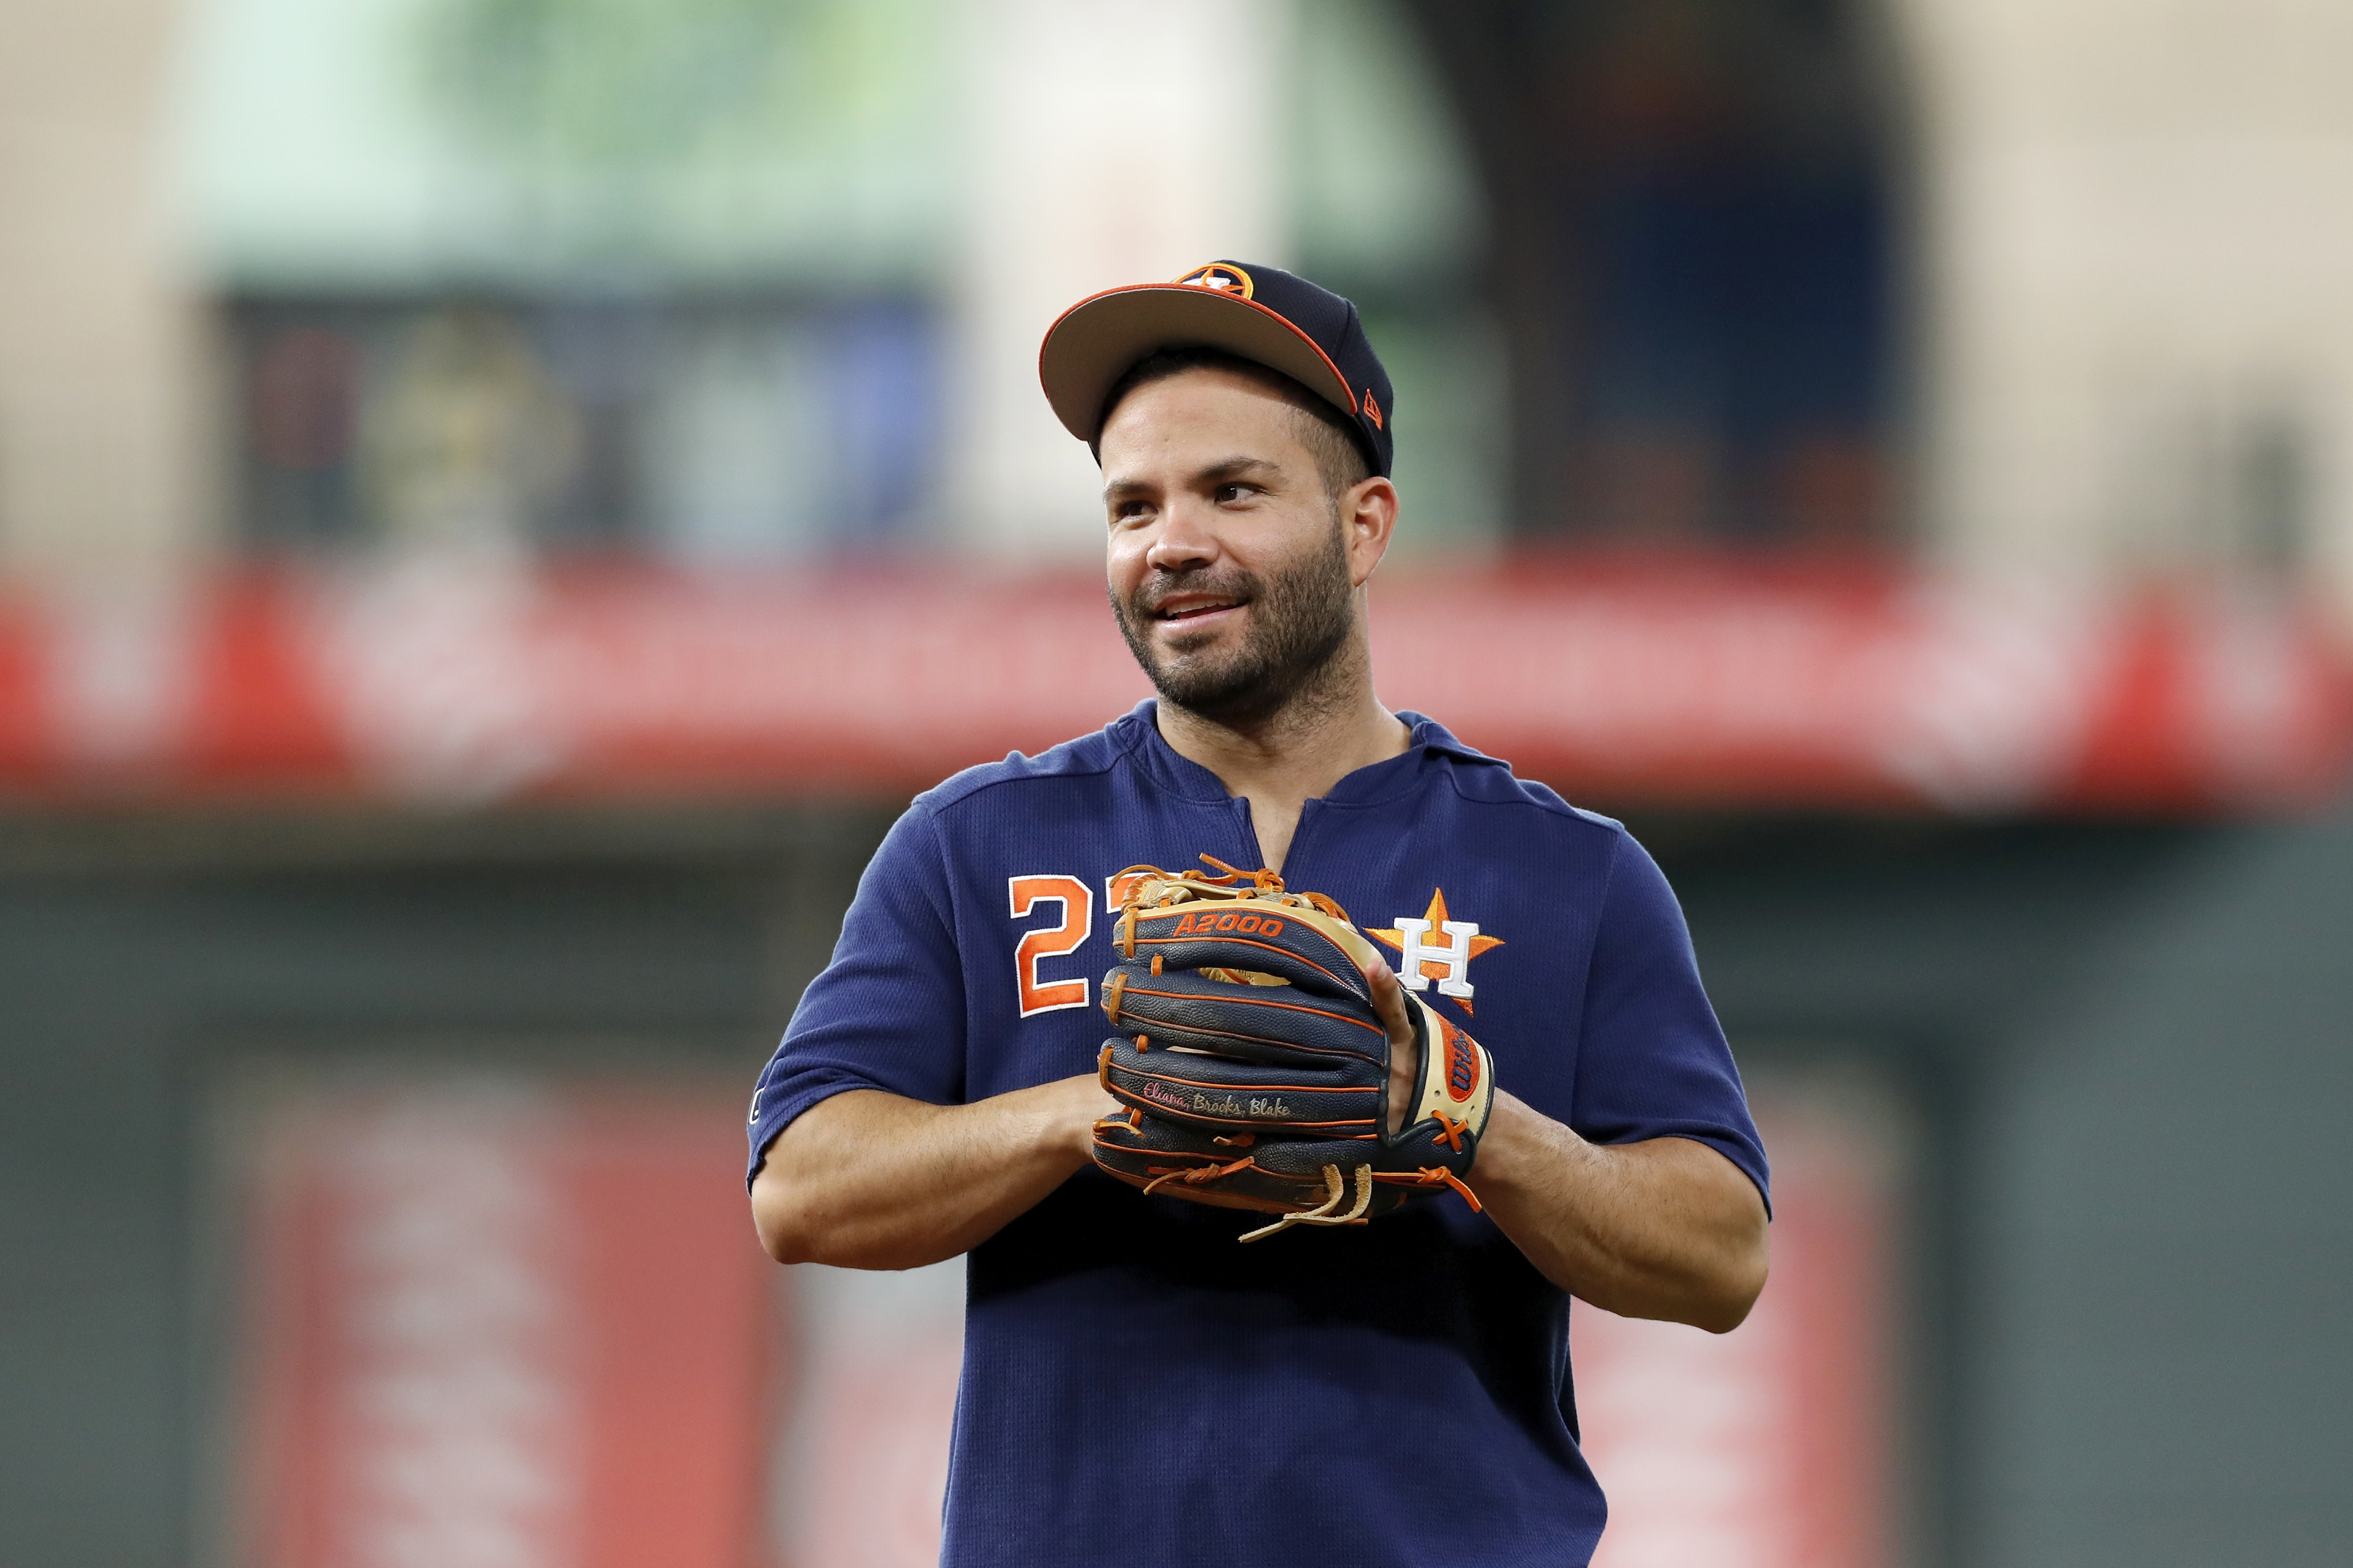 FAX Sports: MLB on X: Jose Altuve on returning to the Astros   / X